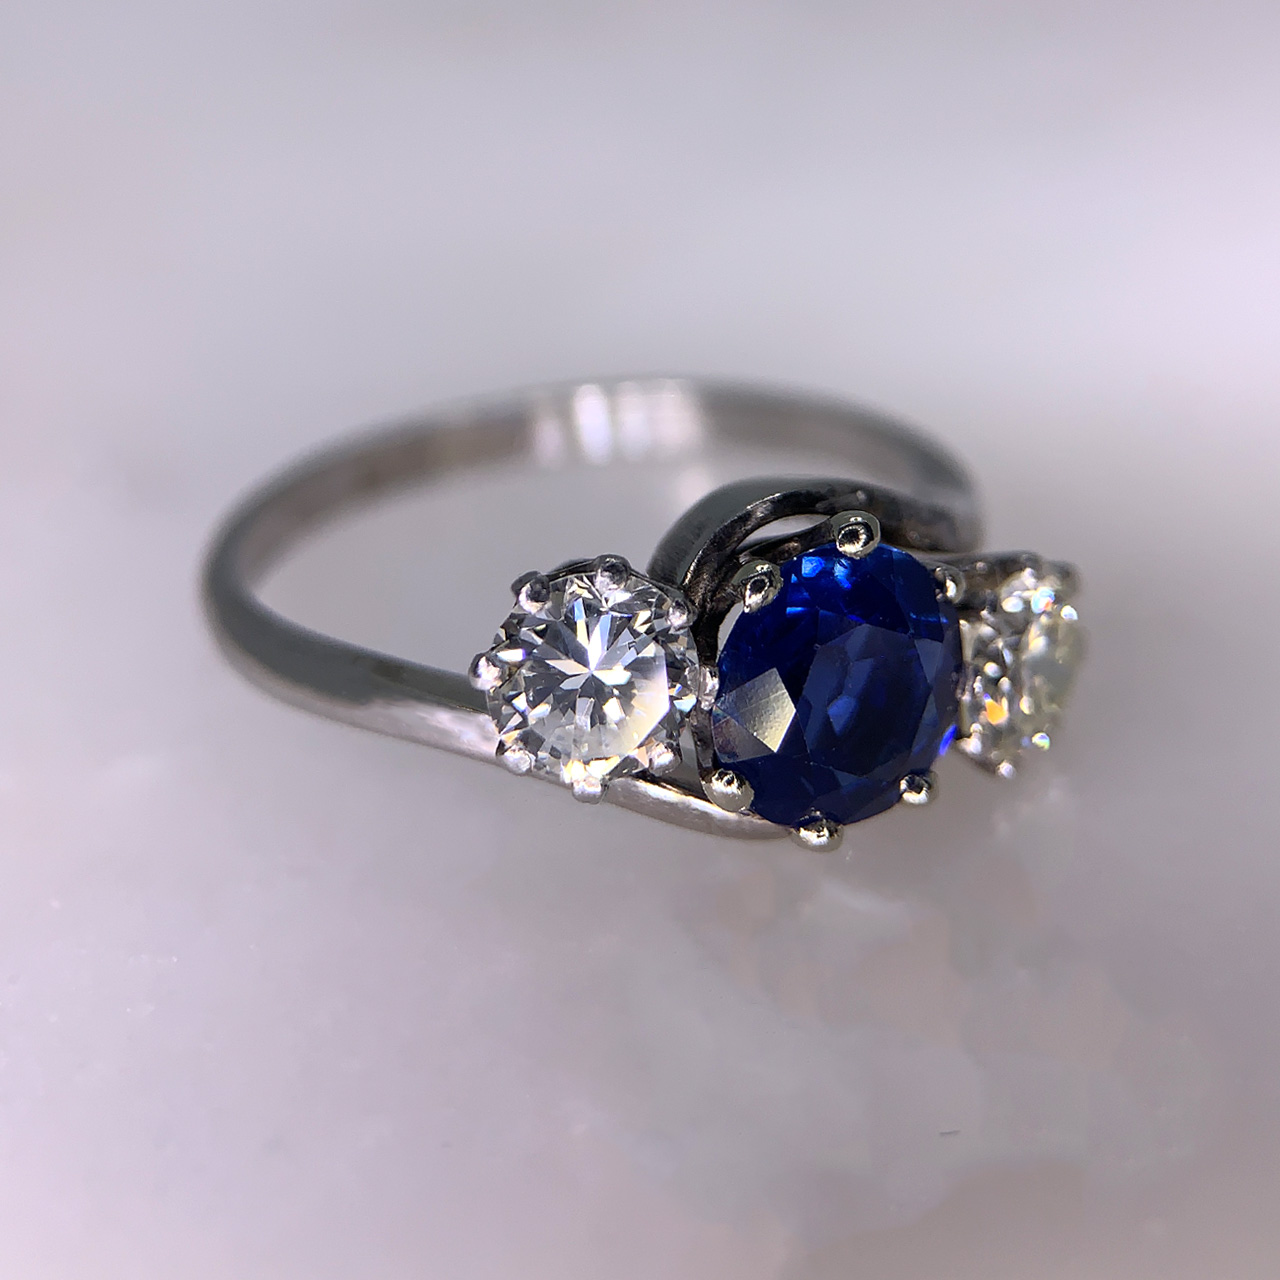 1930's Diamond and Sapphire Twist Trilogy Ring in hallmarked Platinum. This exquisite multi-tone Sapphire, 1.5 carats diamond weight is enclosed by two brilliant cut 1/2 carat diamonds. All stones are claw set. The head of the ring is approximately 17mm x 8.5mm and sits within a twist shank in the most perfect condition.